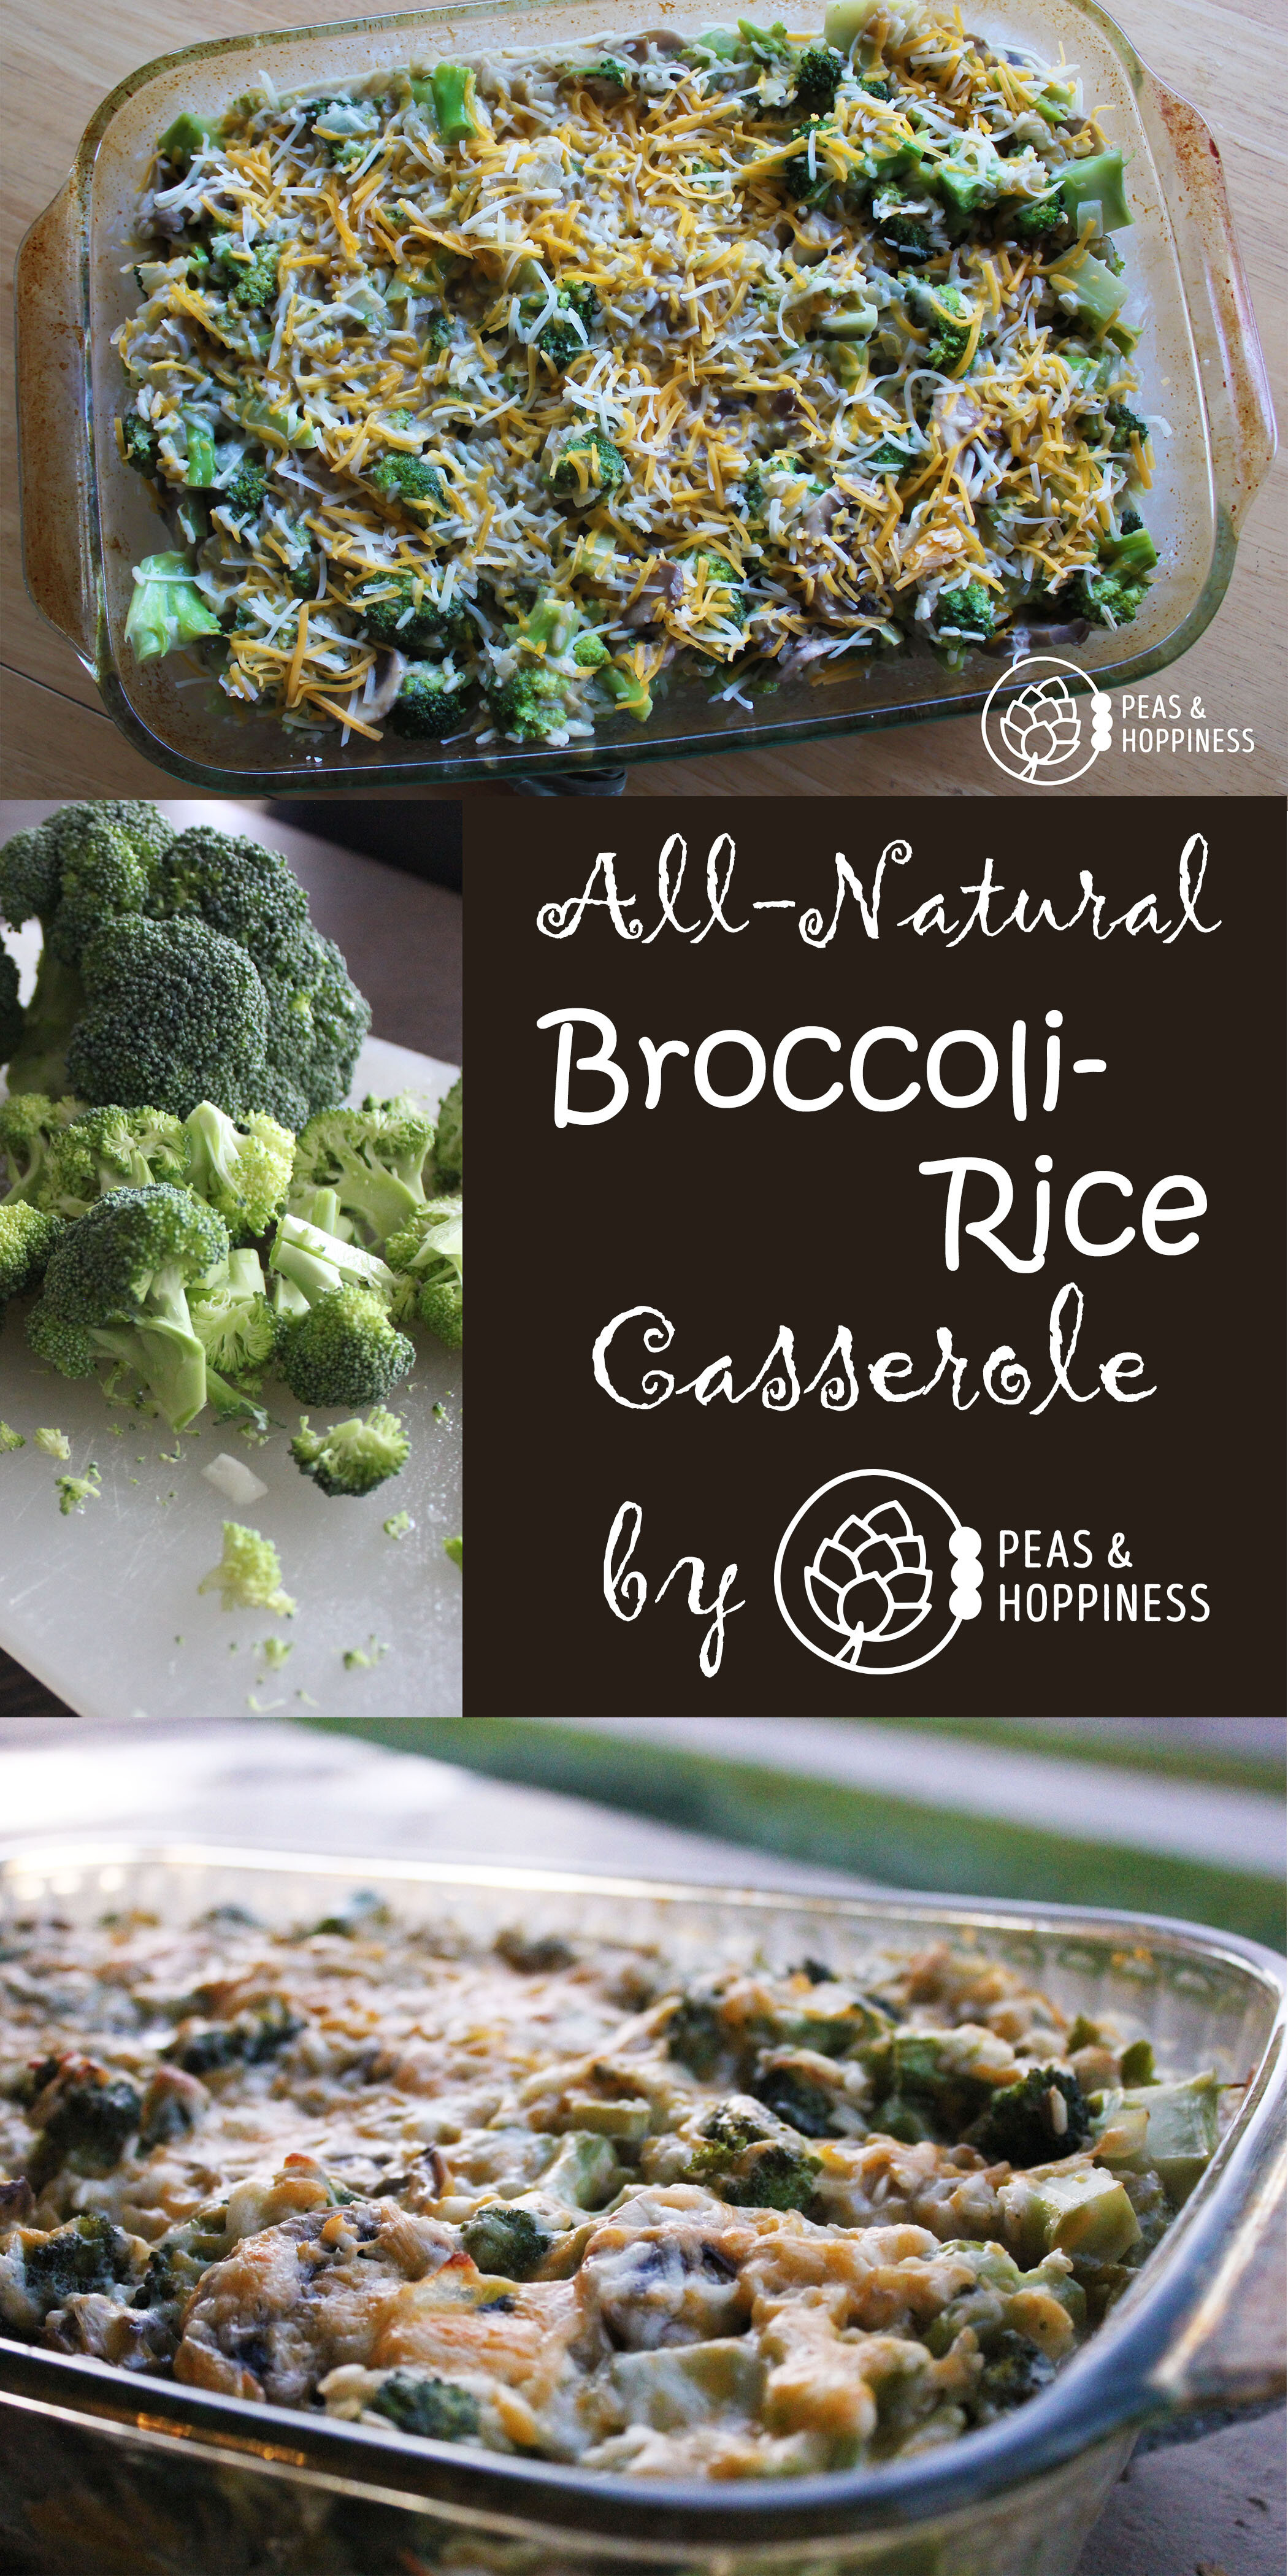 All Natural Broccoli Rice Casserole from Peas and Hoppiness - www.peasandhoppiness.com